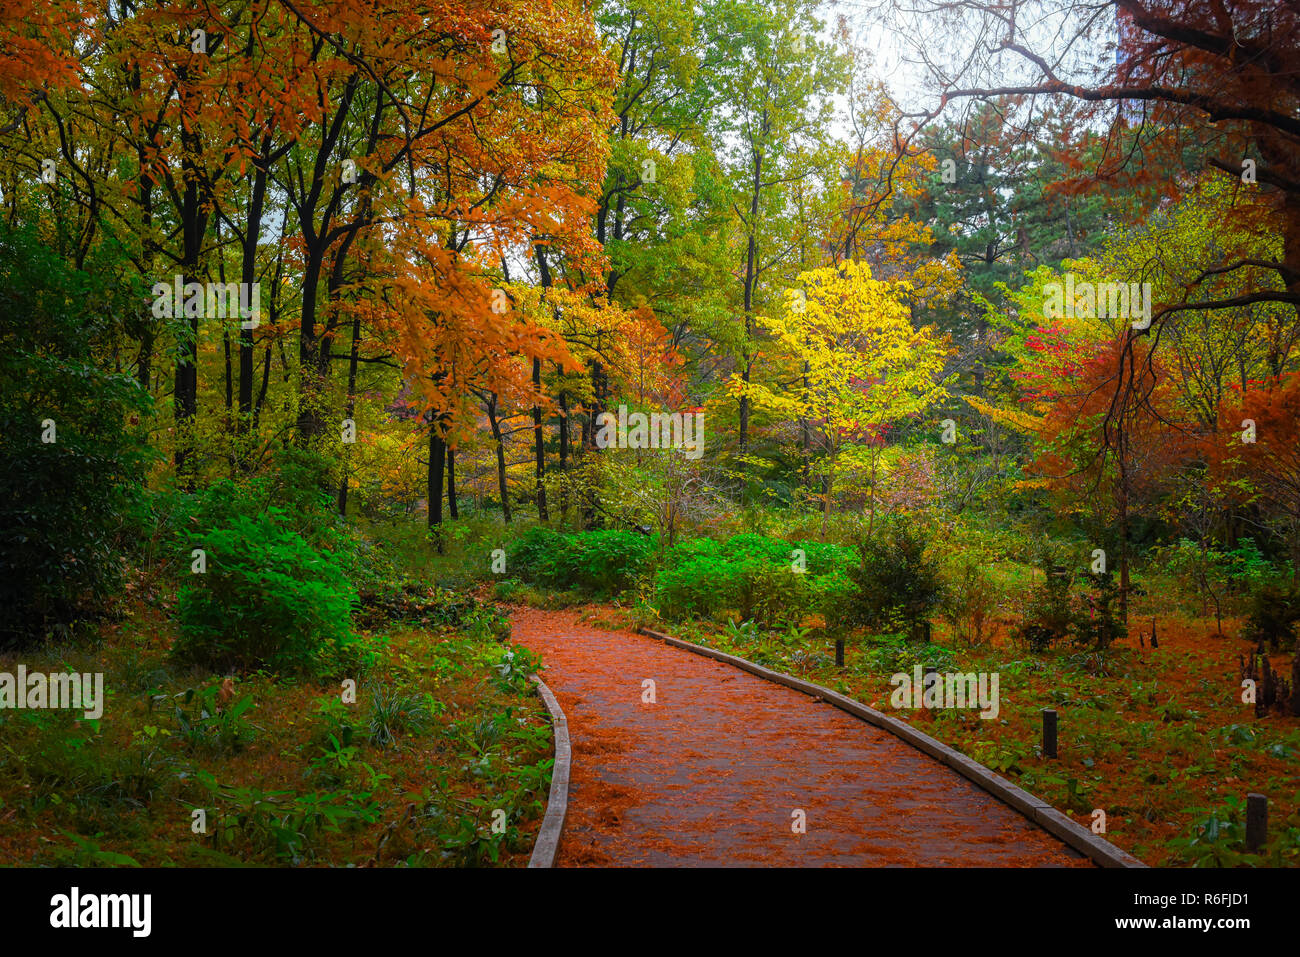 Pathway in the forest in autumn with red, orange, green and brown plants, trees and leaves. Stock Photo